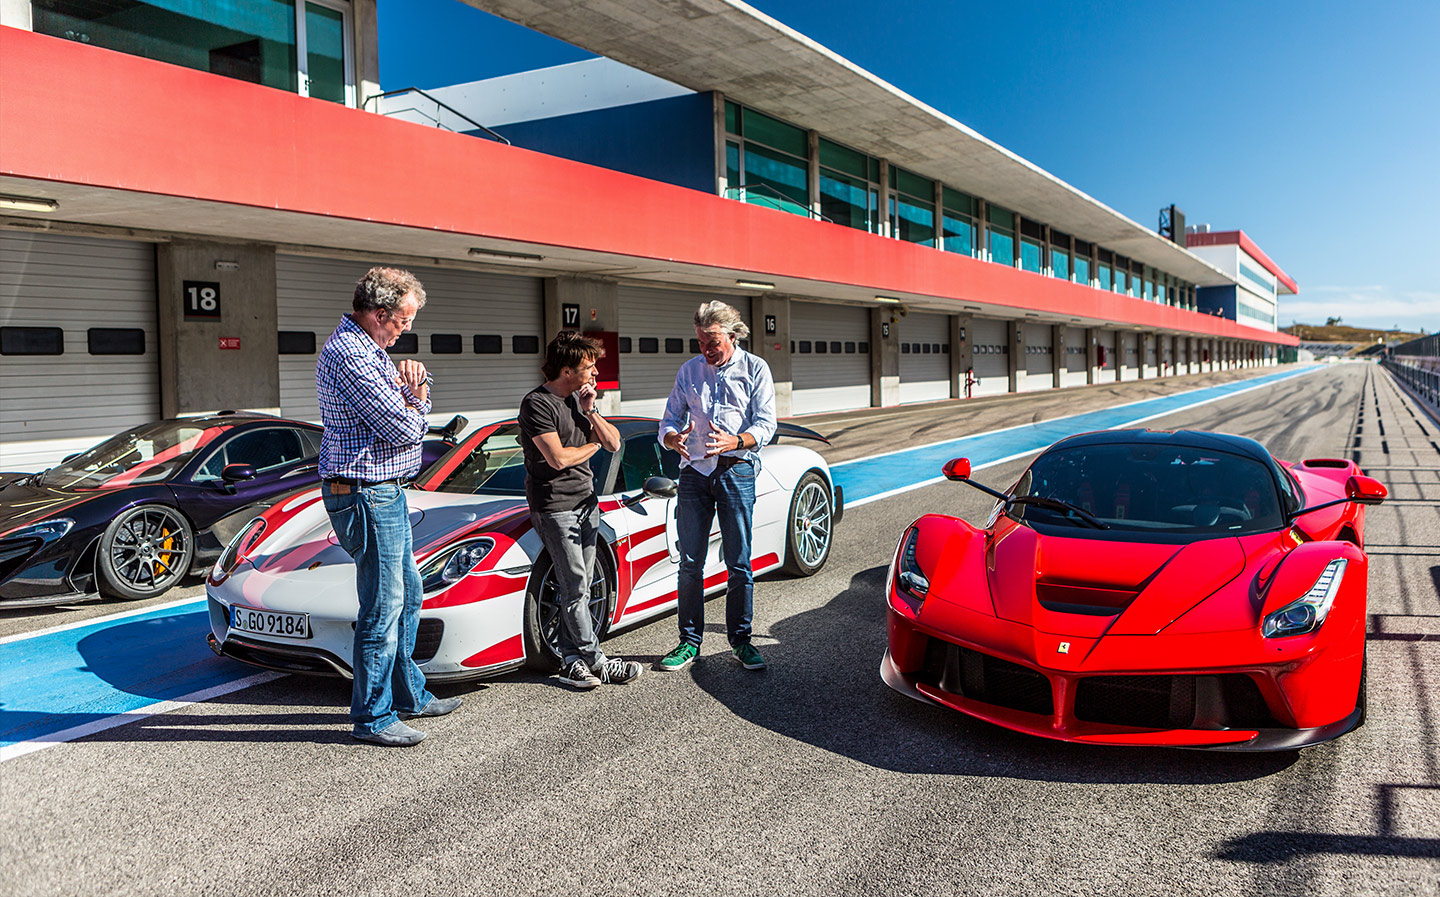 FRIENDS REUNITED Filming The Grand Tour in Portugal, with a hybrid supercar face-off between a McLaren P1, a Porsche 918 Spyder and a LaFerrari 